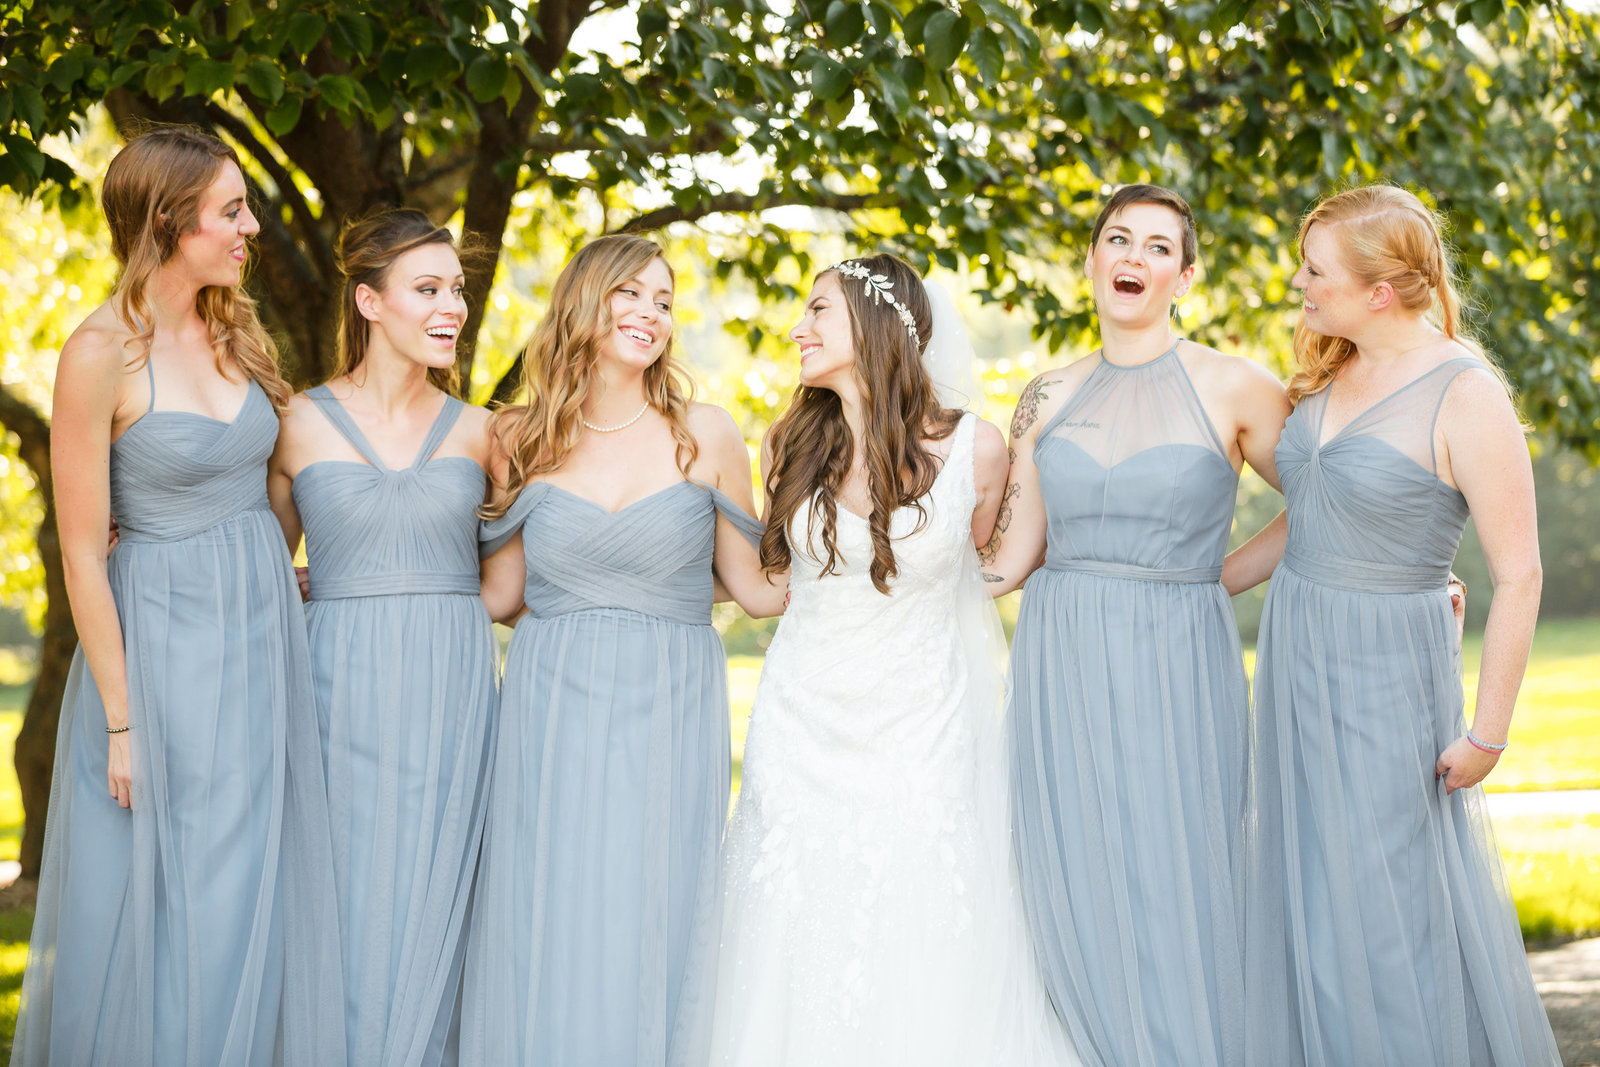 Bridal party at Brooklyn Botanical Garden Wedding in New York City by Jamerlyn Brown Photography